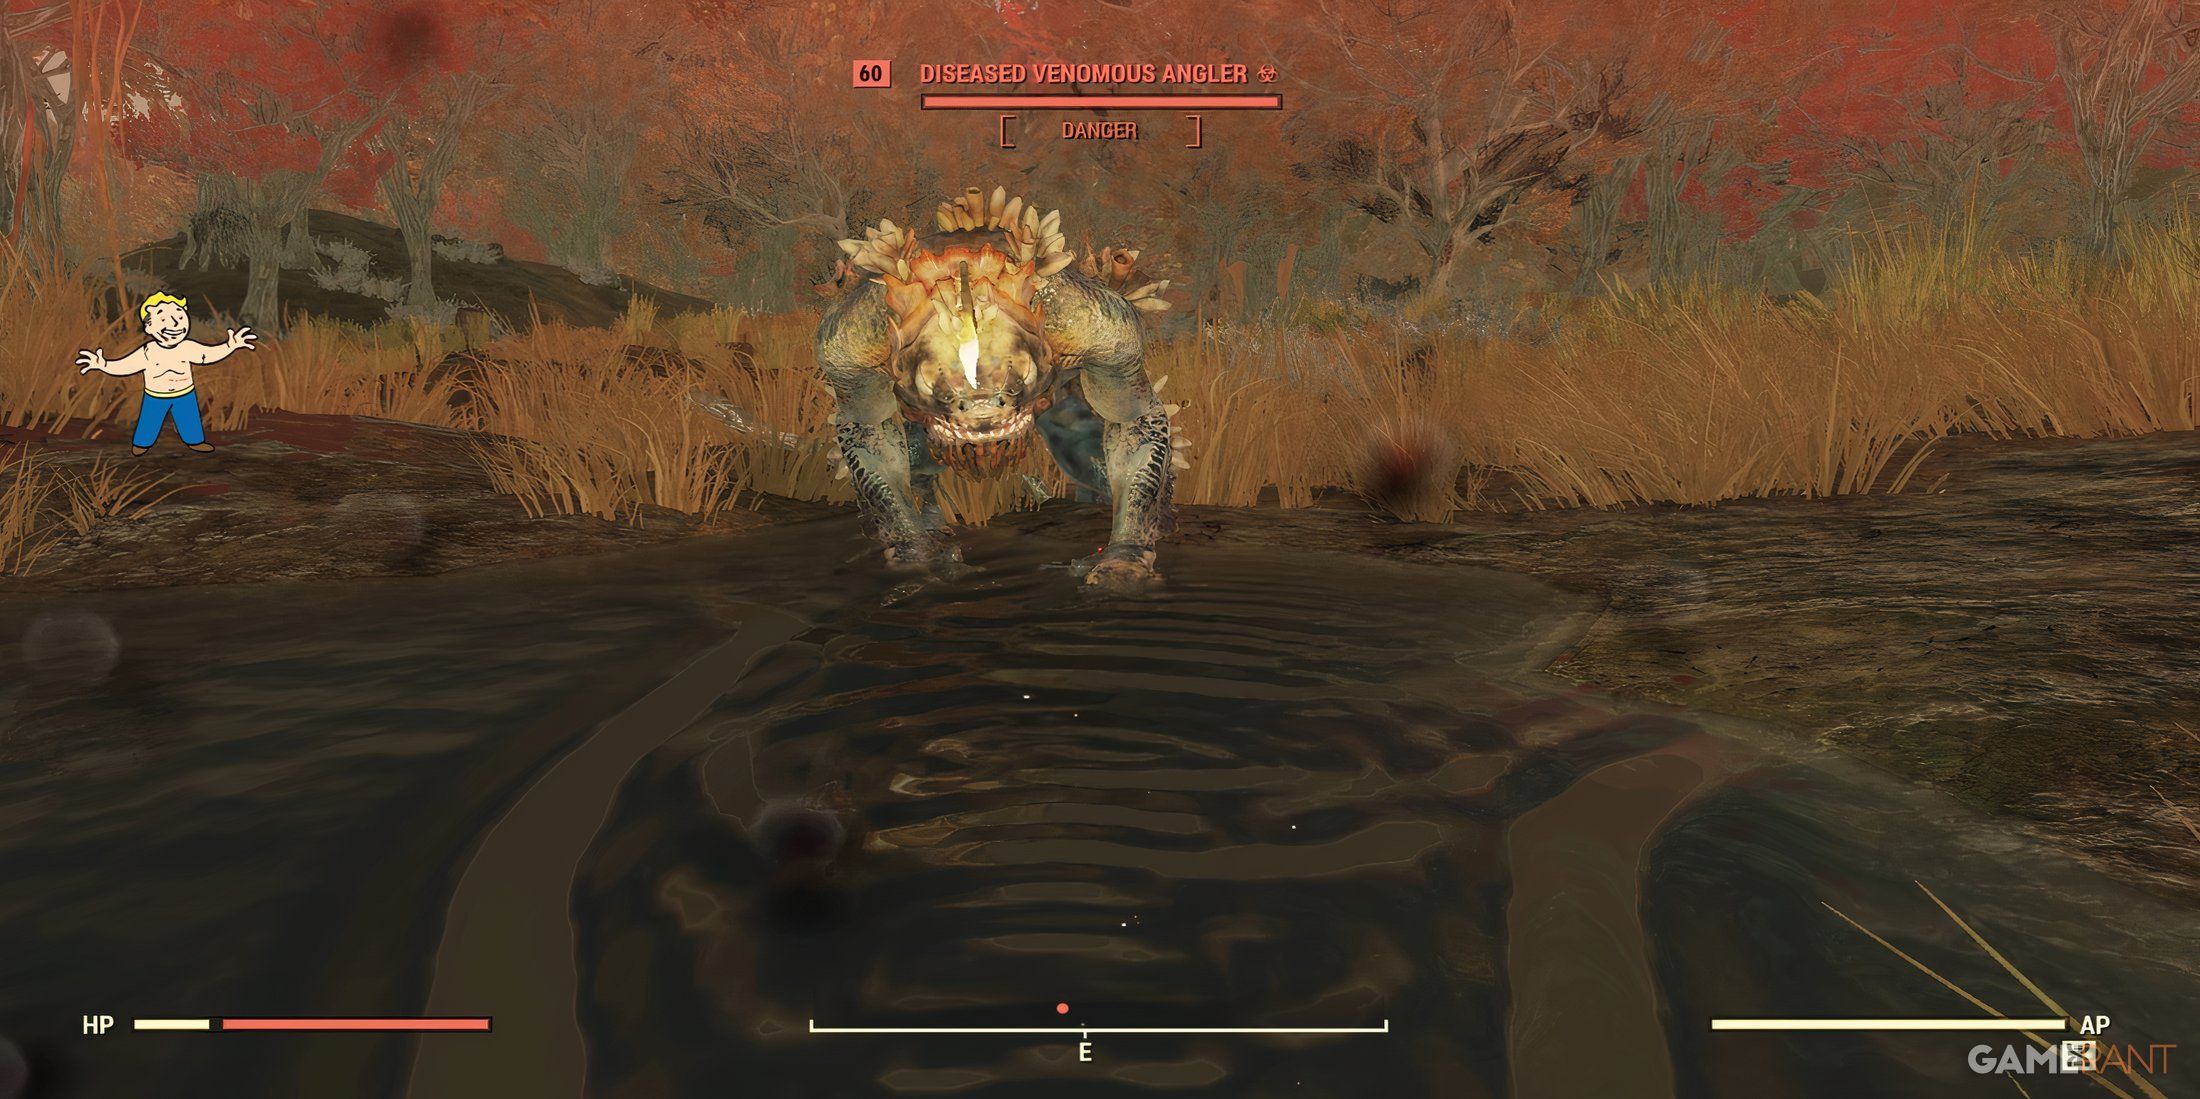 An Angler in Fallout 76